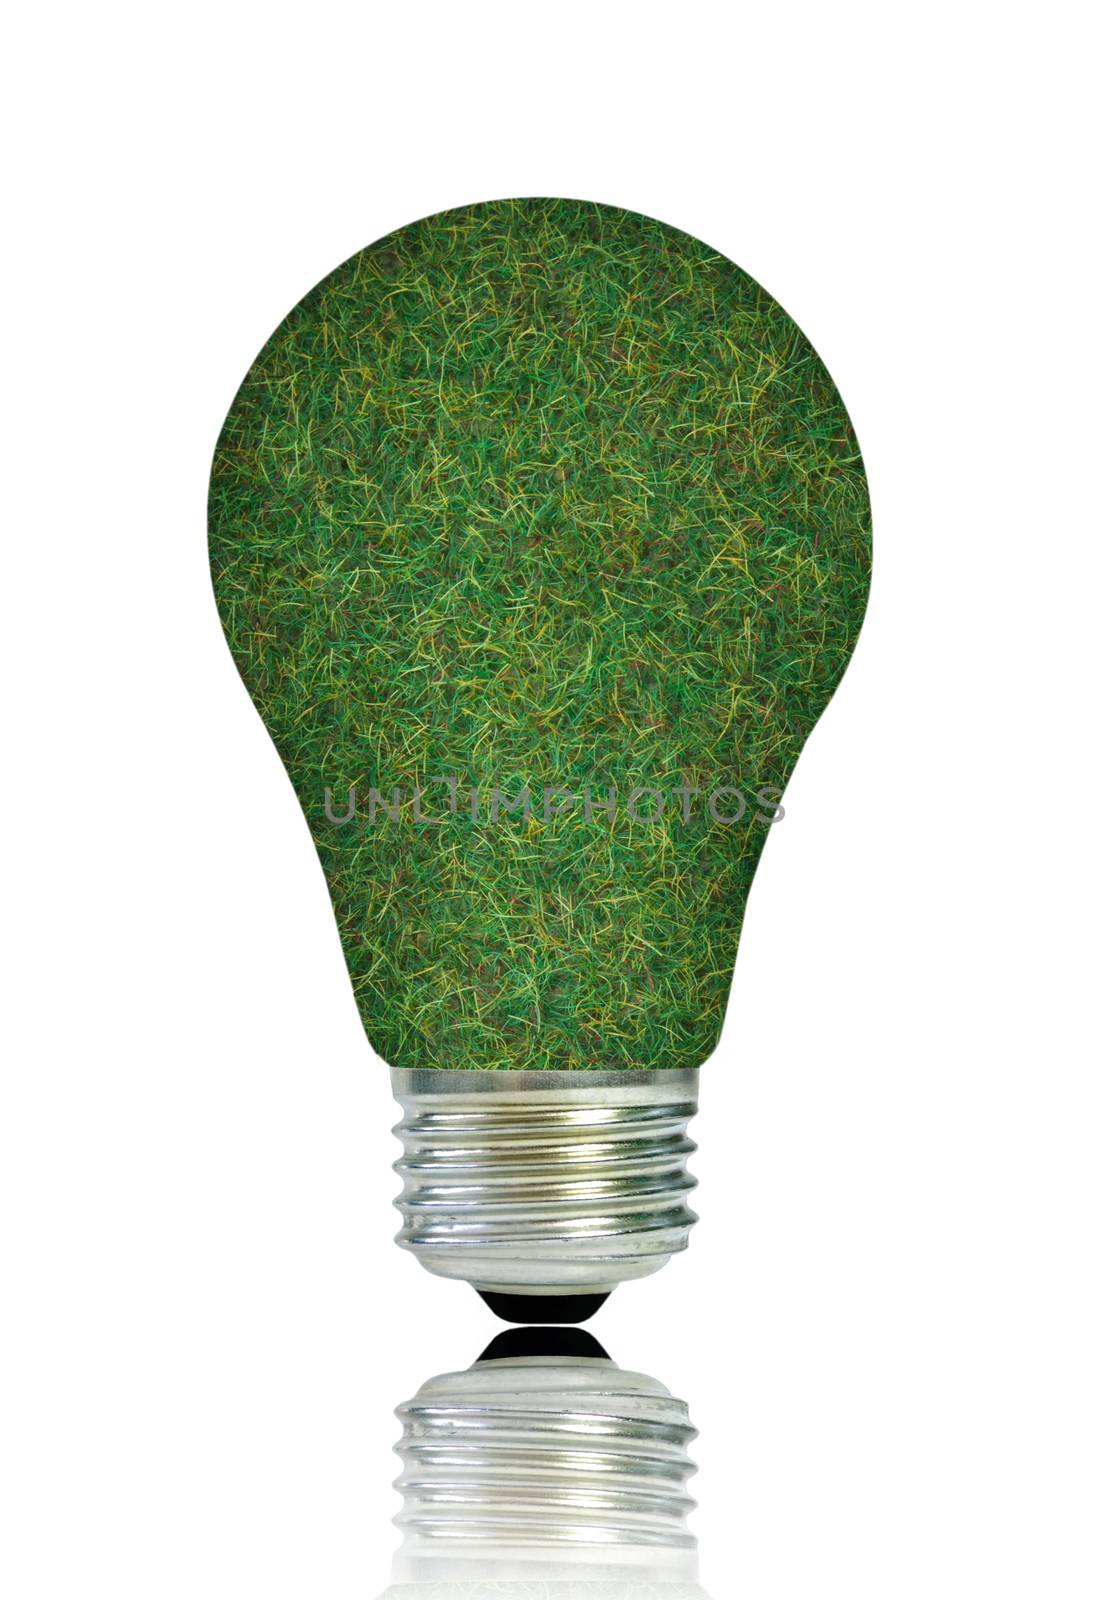 Light bulb made from grass over a white background